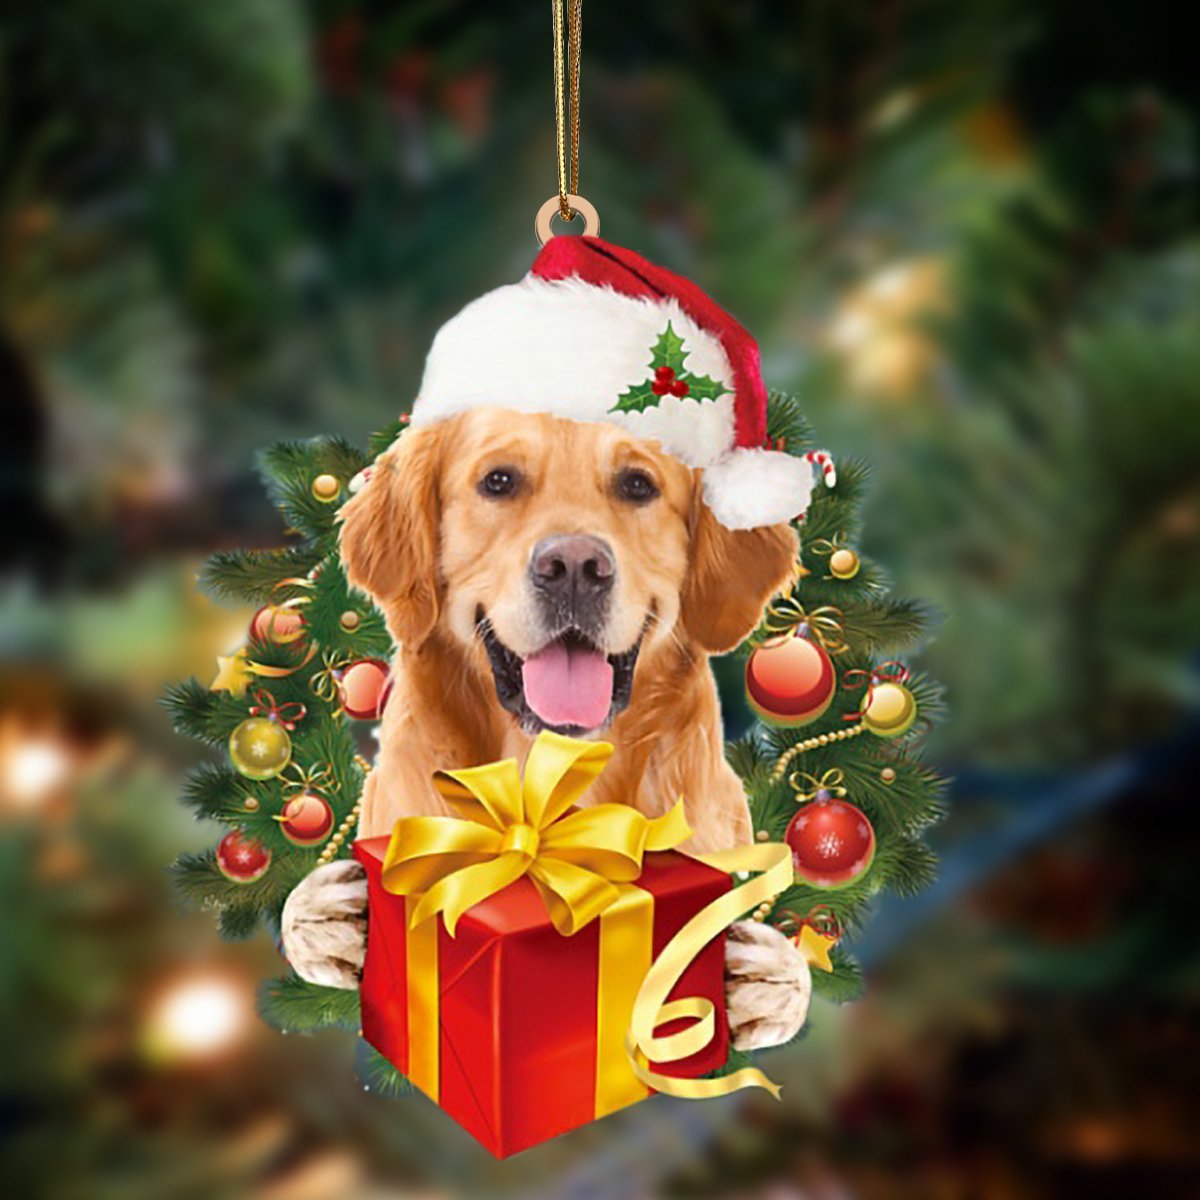 Golden Retriever-Dogs give gifts Hanging Ornament